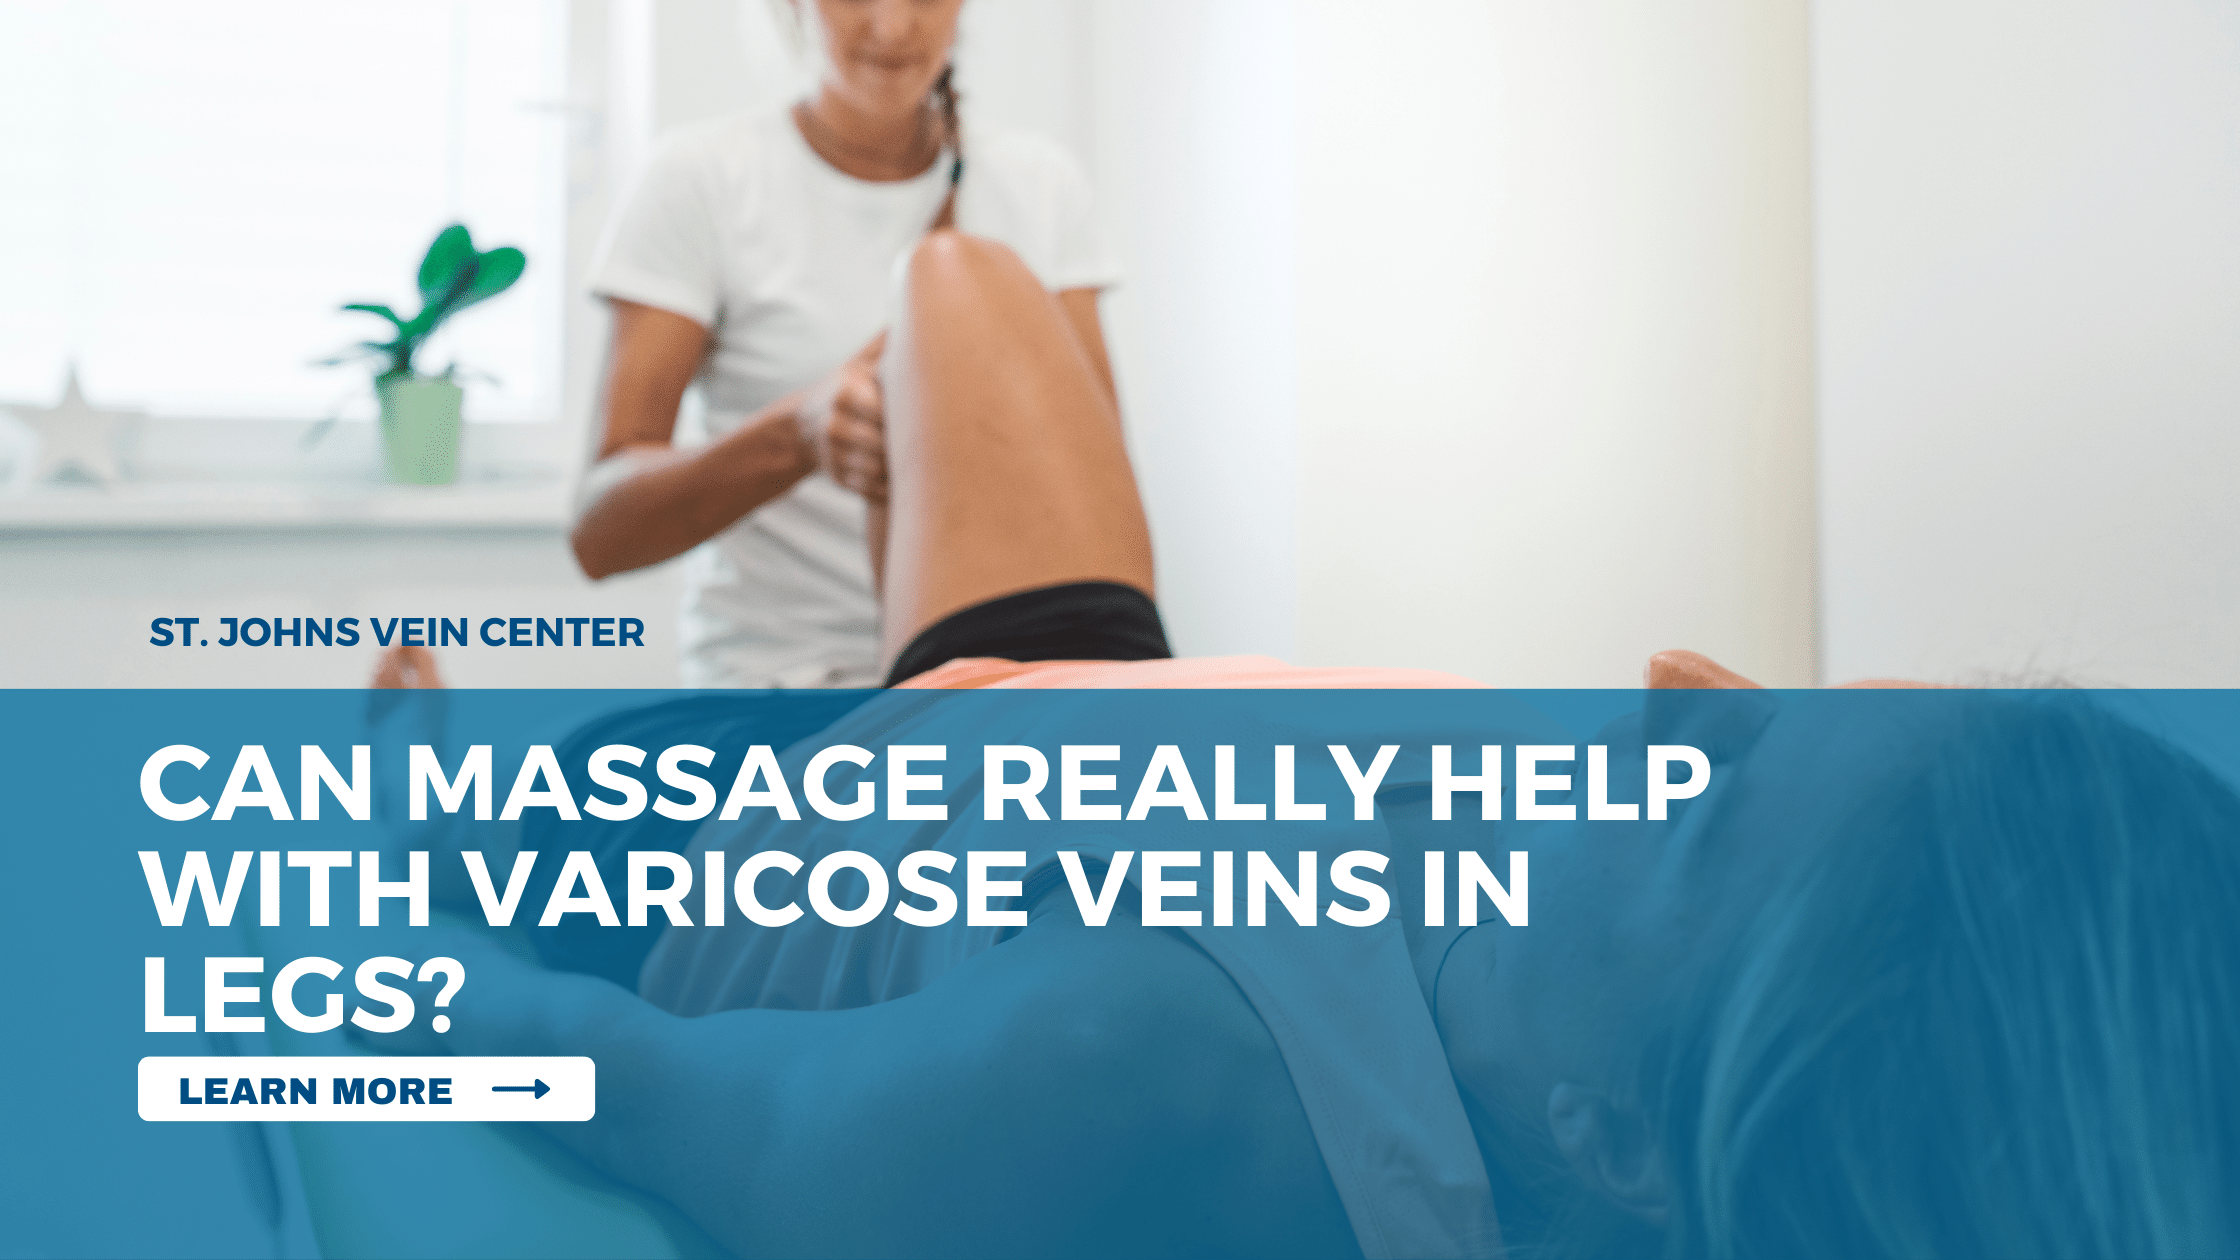 Can Massage Really Help with Varicose Veins in Legs